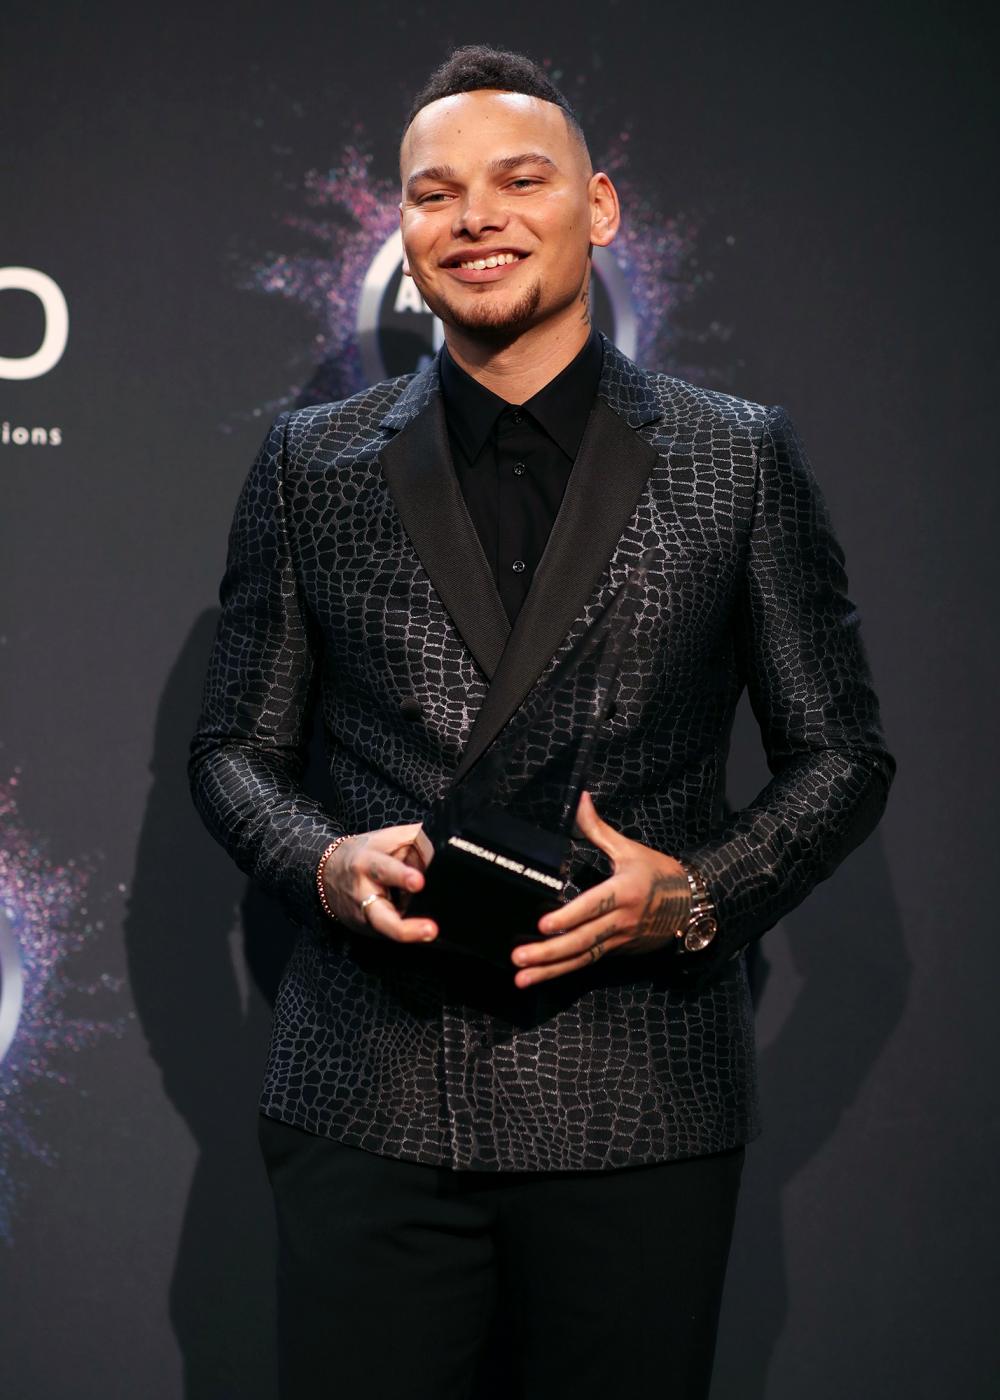 Kane Brown Thinking About 2nd Baby 1 Month After Welcoming Daughter